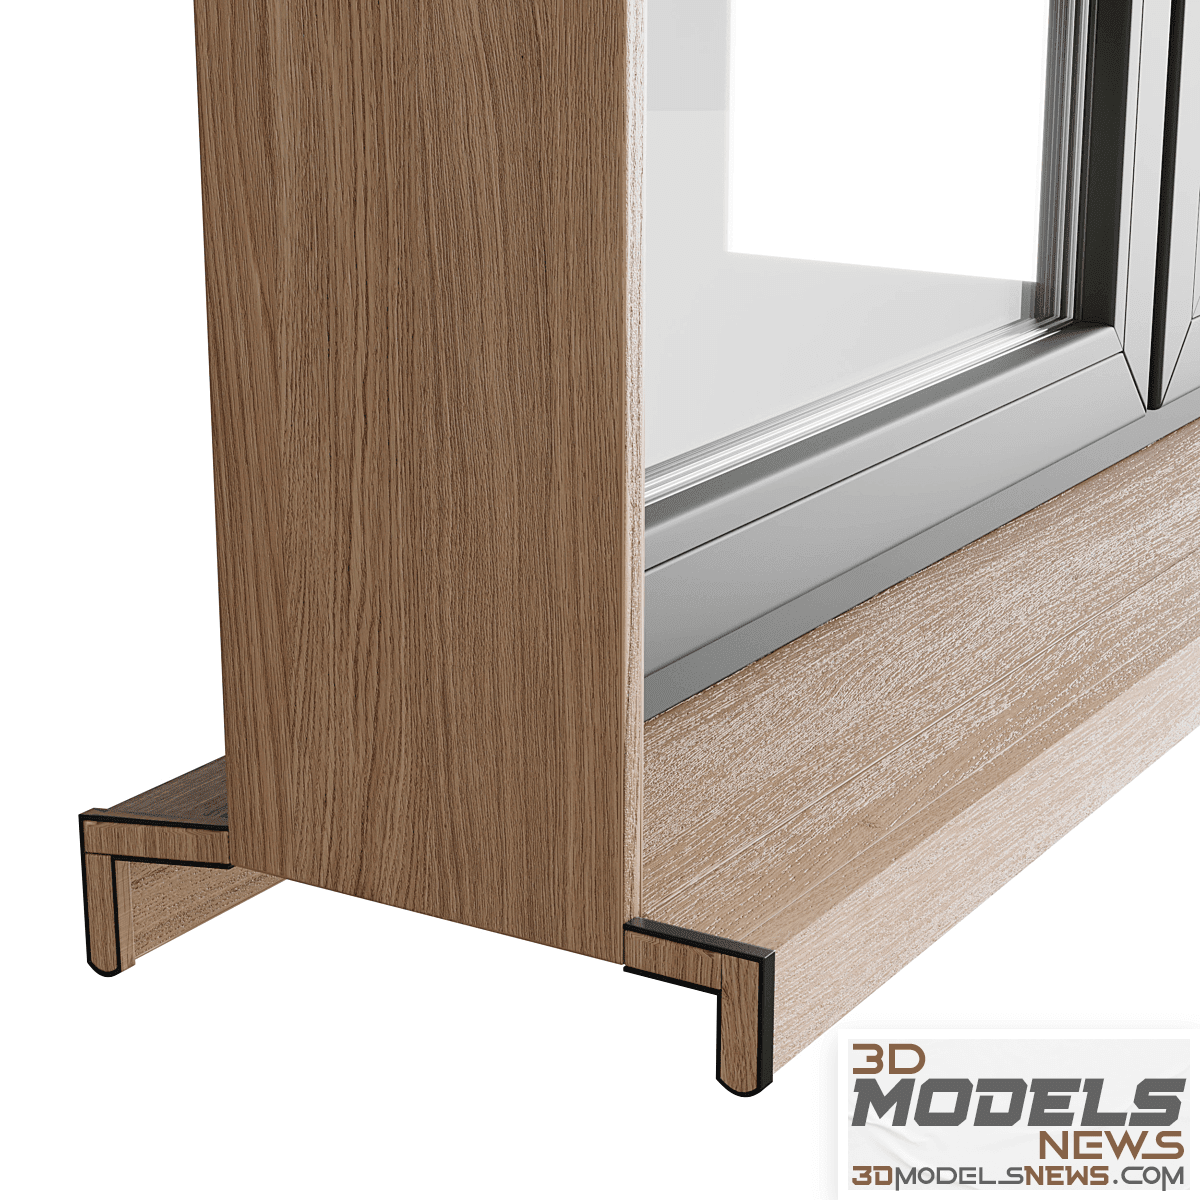 Modern windows models with metal blinds and wooden 4